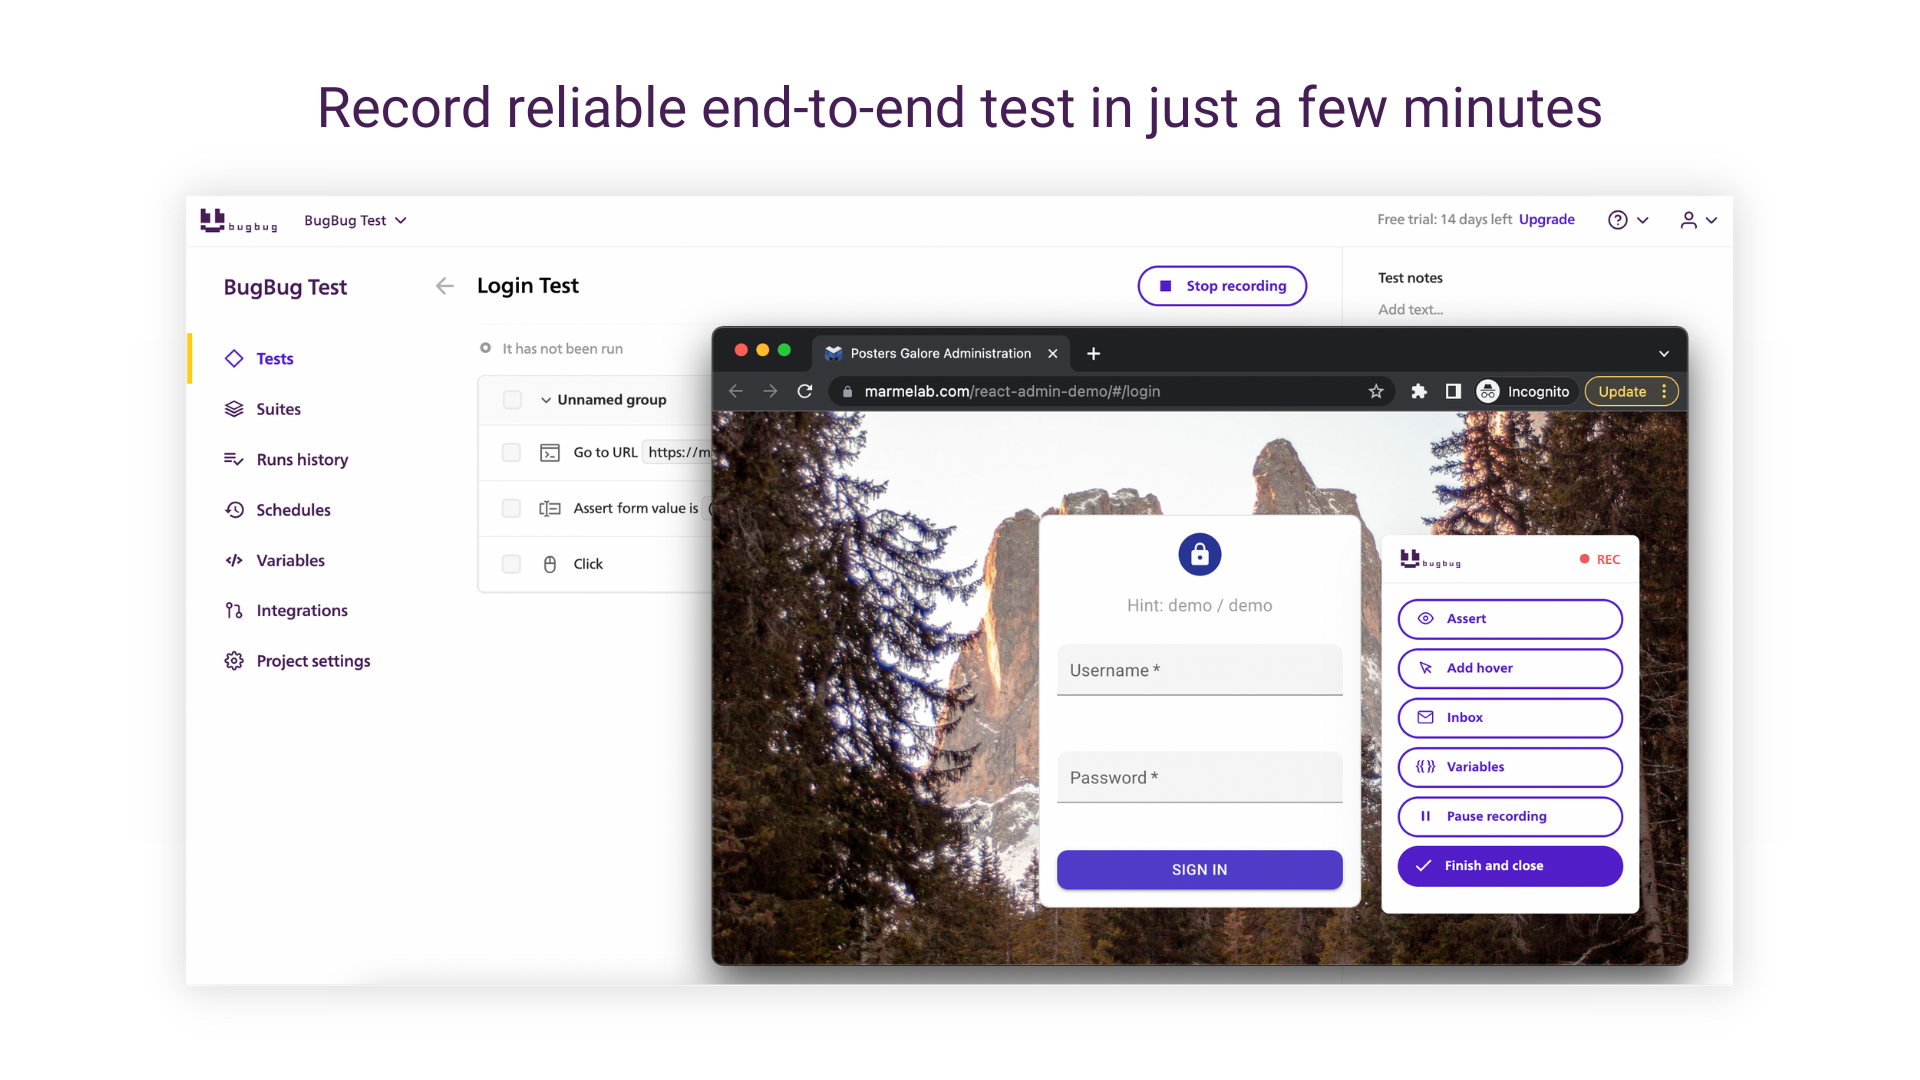 Record reliable end-to-end tests in just a few minutes